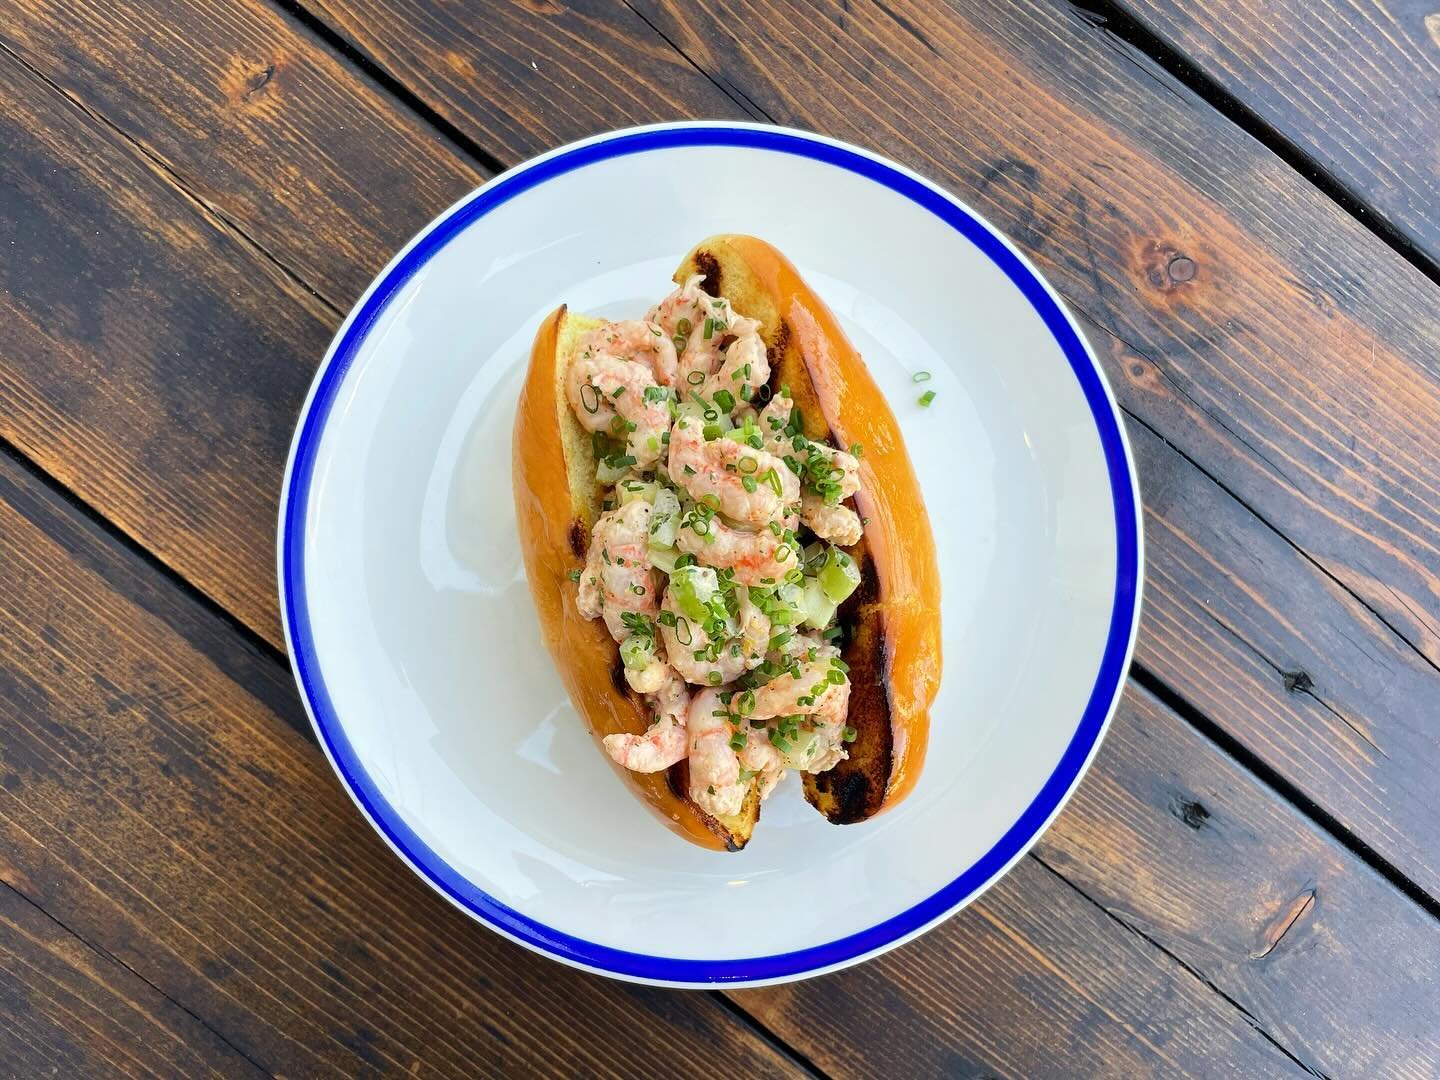 𝕾𝖍𝖗𝖎𝖒𝖕 𝕽𝖔𝖑𝖑 &times; 𝕻𝖆𝖙𝖎𝖔 🏝️

Don&rsquo;t pinch yourself, you&rsquo;re not dreaming! 💭

@meatwalllet just dropped this stunner of a shrimp roll with cold water shrimp from @afishionadomonger 🦐

And yes, that&rsquo;s our patio table 